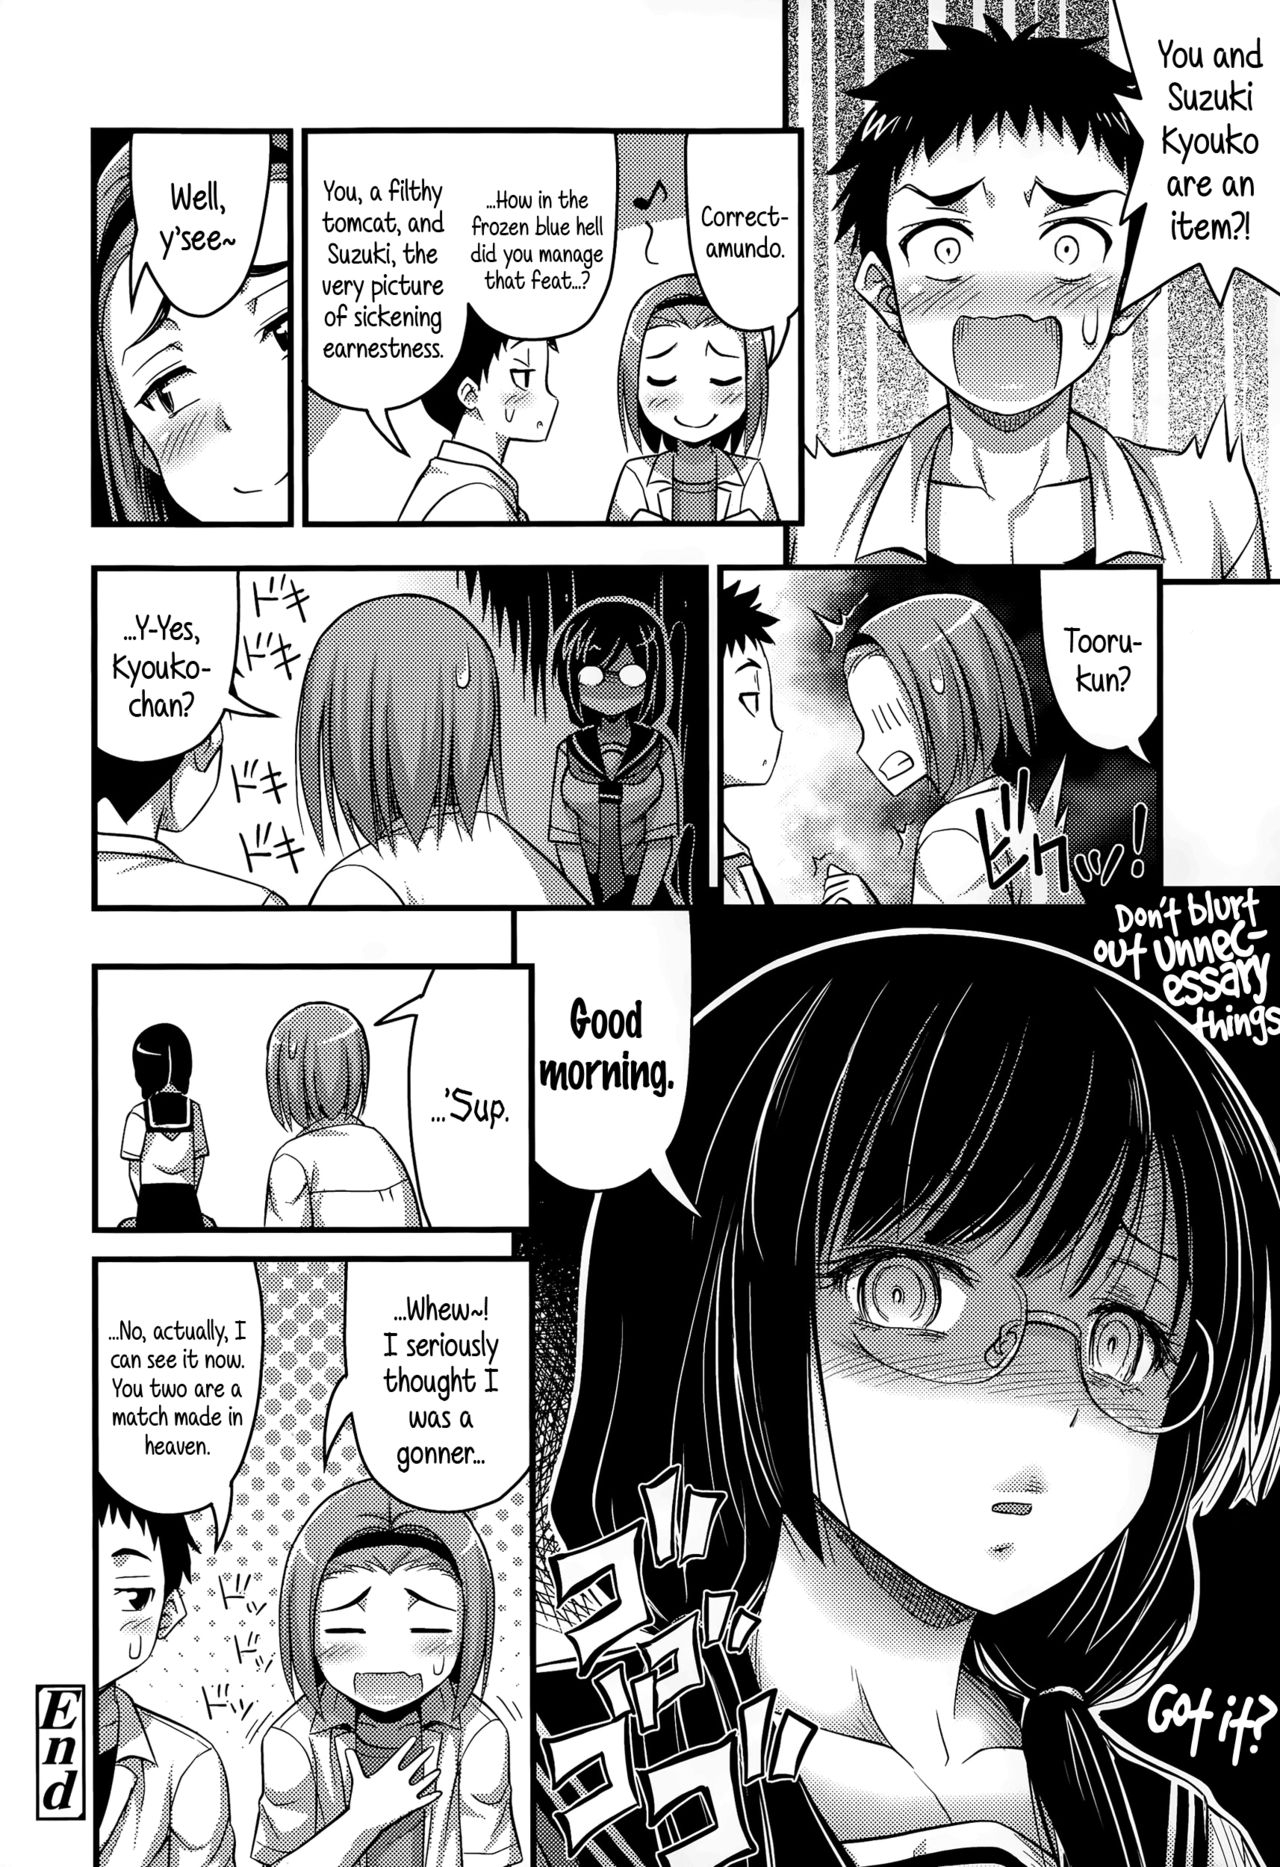 [Noise] Charao to Megane | Tomcat & Glasses (COMIC LO 2015-08) [English] {5 a.m.} 17